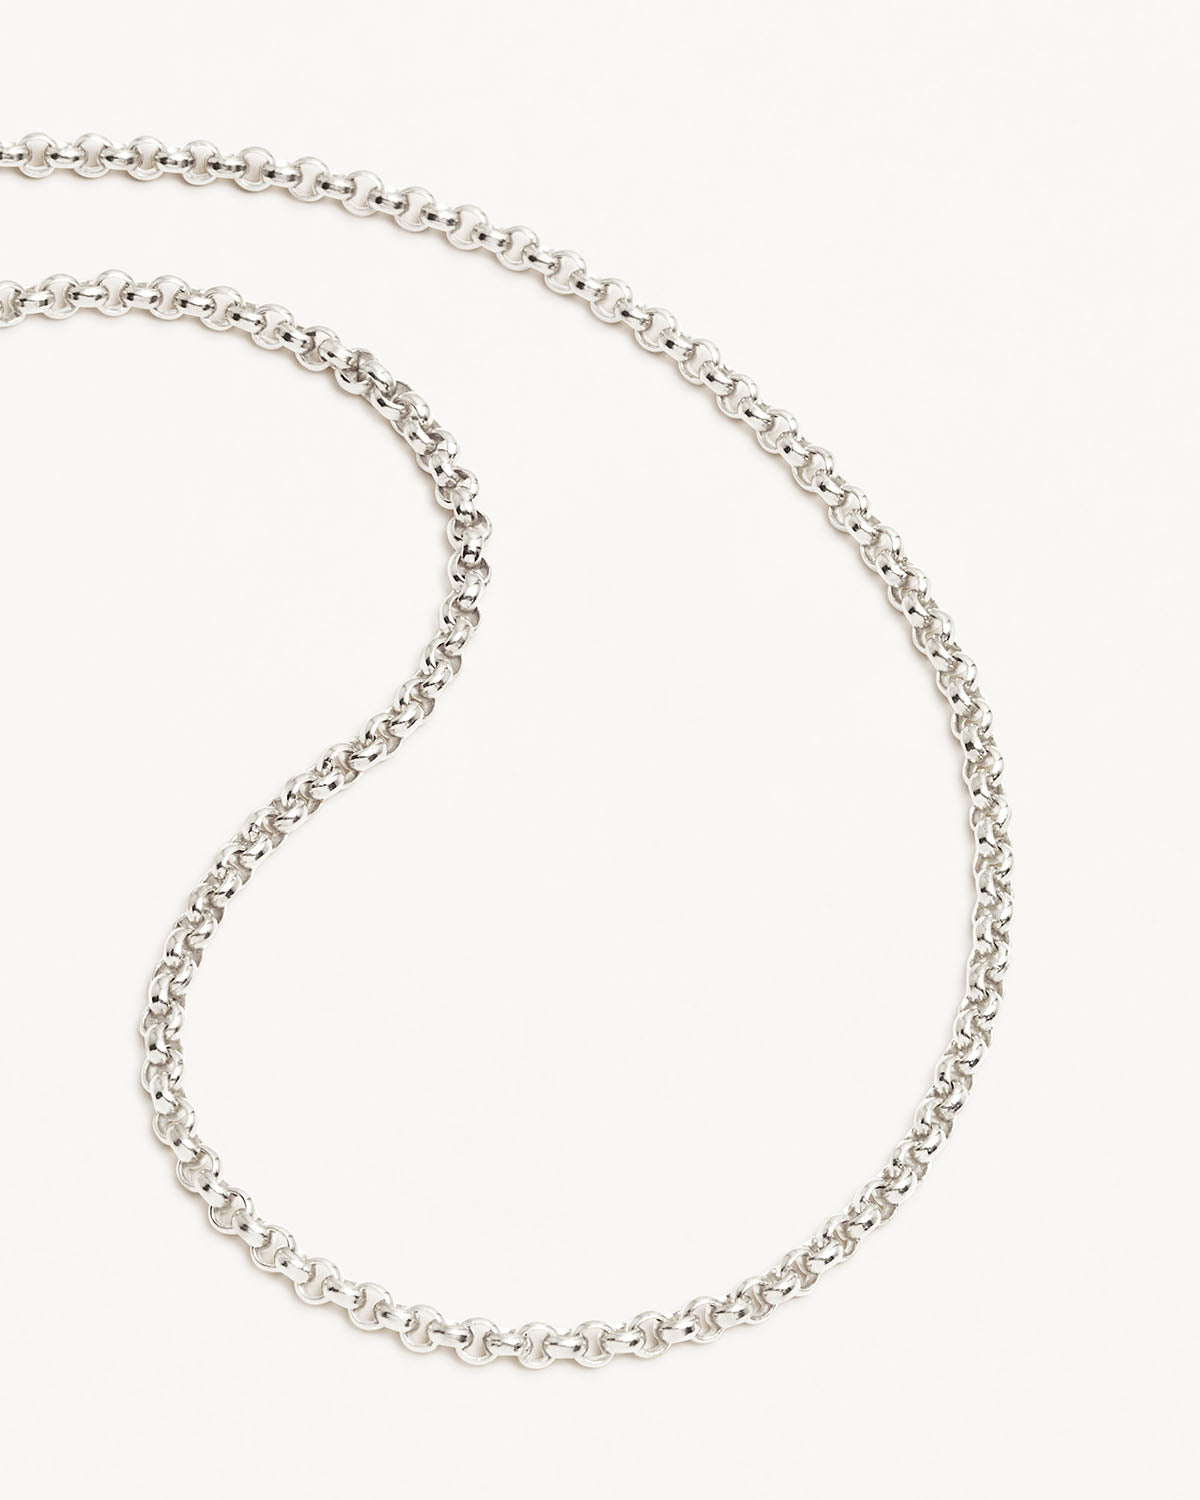 THOMAS SABO Belcher Chain Necklace, Gold at John Lewis & Partners